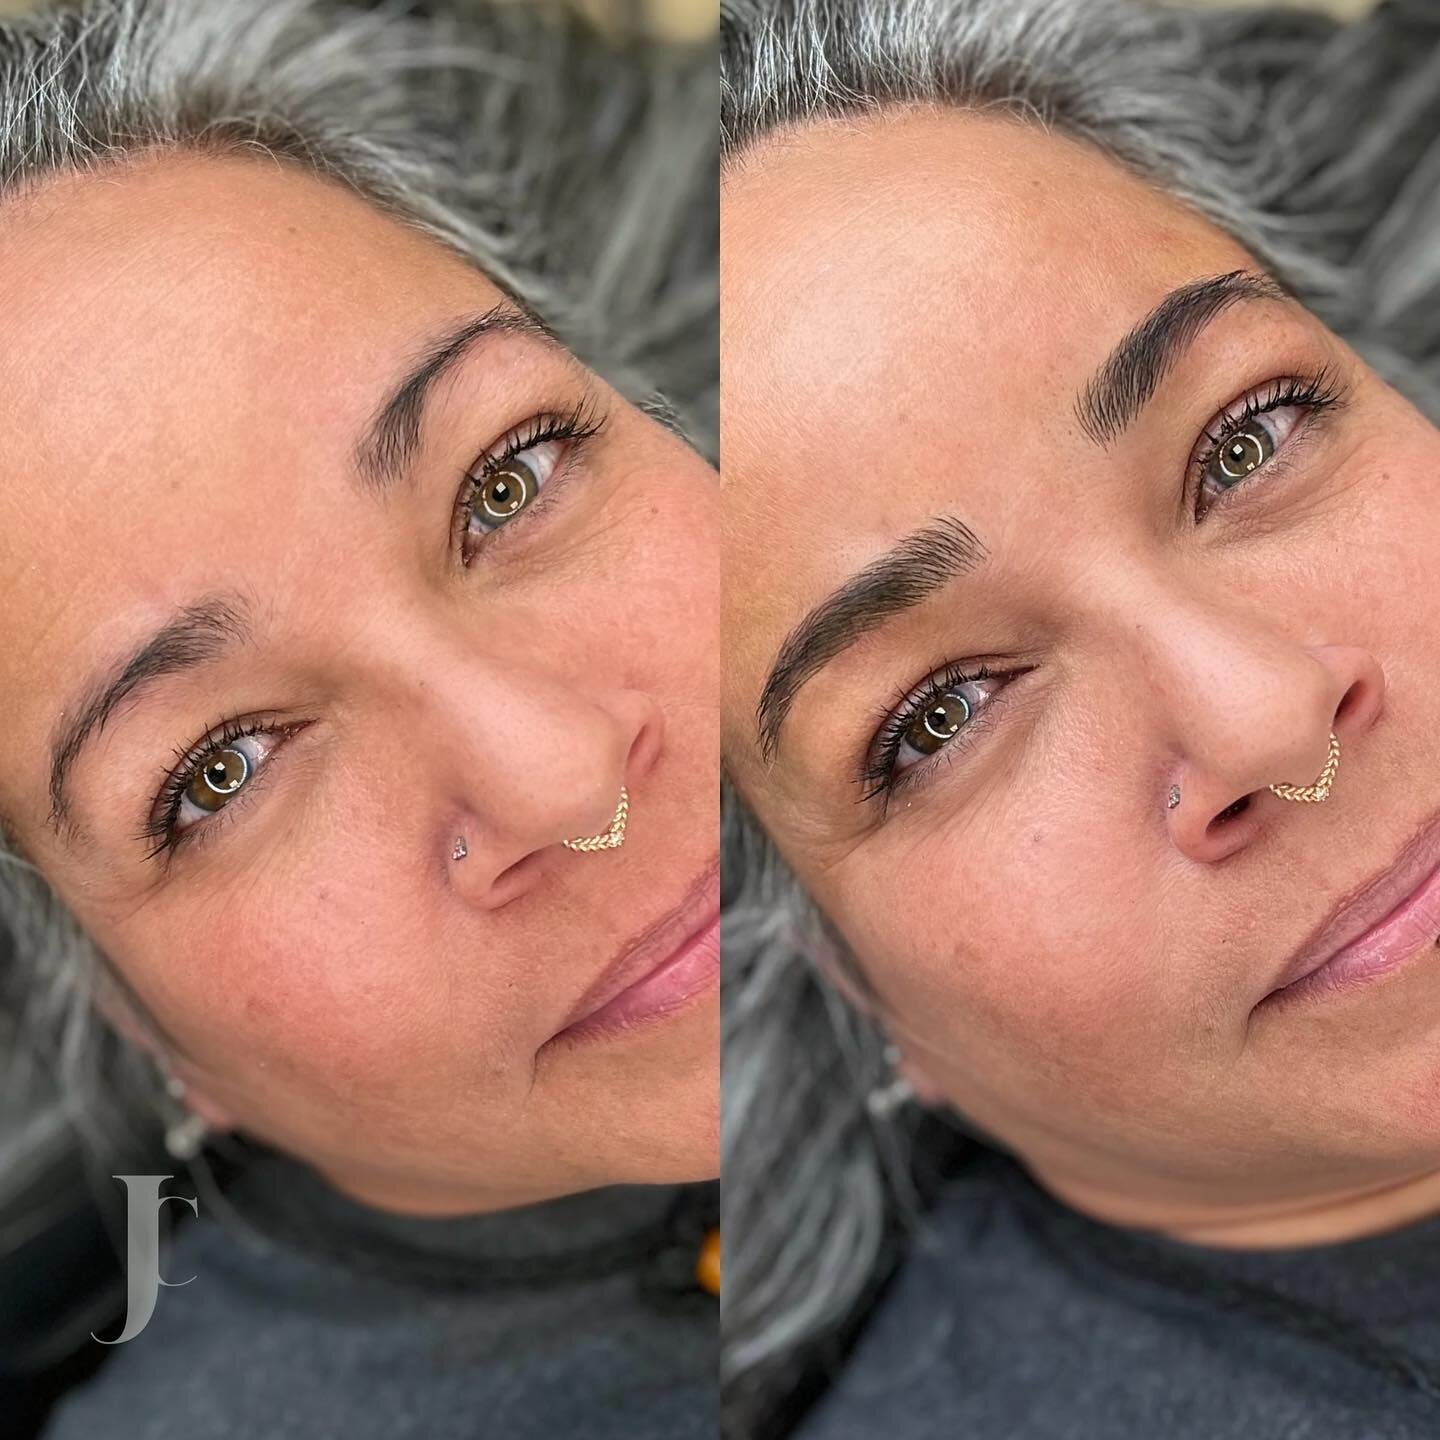 Have your brows thinned out over time? Let&rsquo;s restore them back to their original glory with a combo brow! 🙌🏼

Products used: 
@bowleresthetics .16mm 18u blade, candy cleanse, comfort candy numbing, aftercare balm
@browdaddy 1:1 schokolade &am